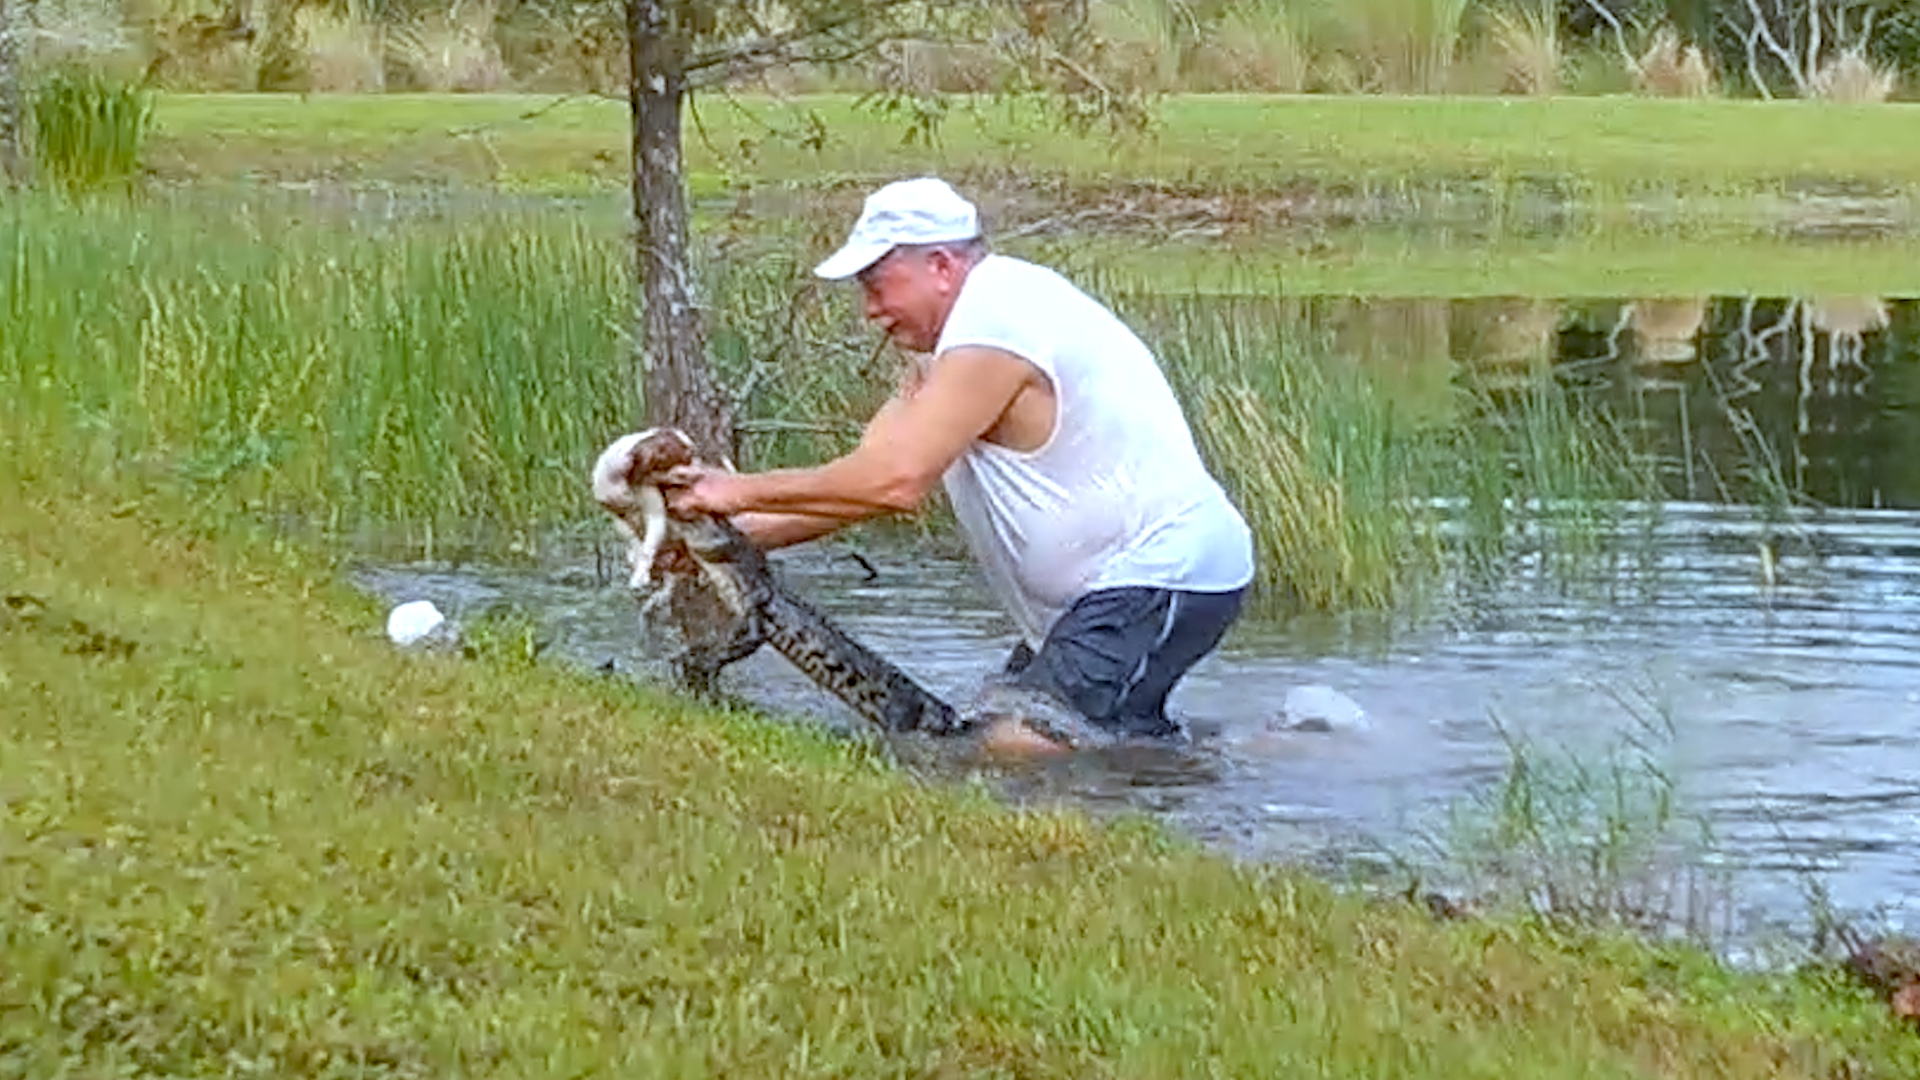 Florida man rescues puppy from alligator in Lee County - The Washington Post